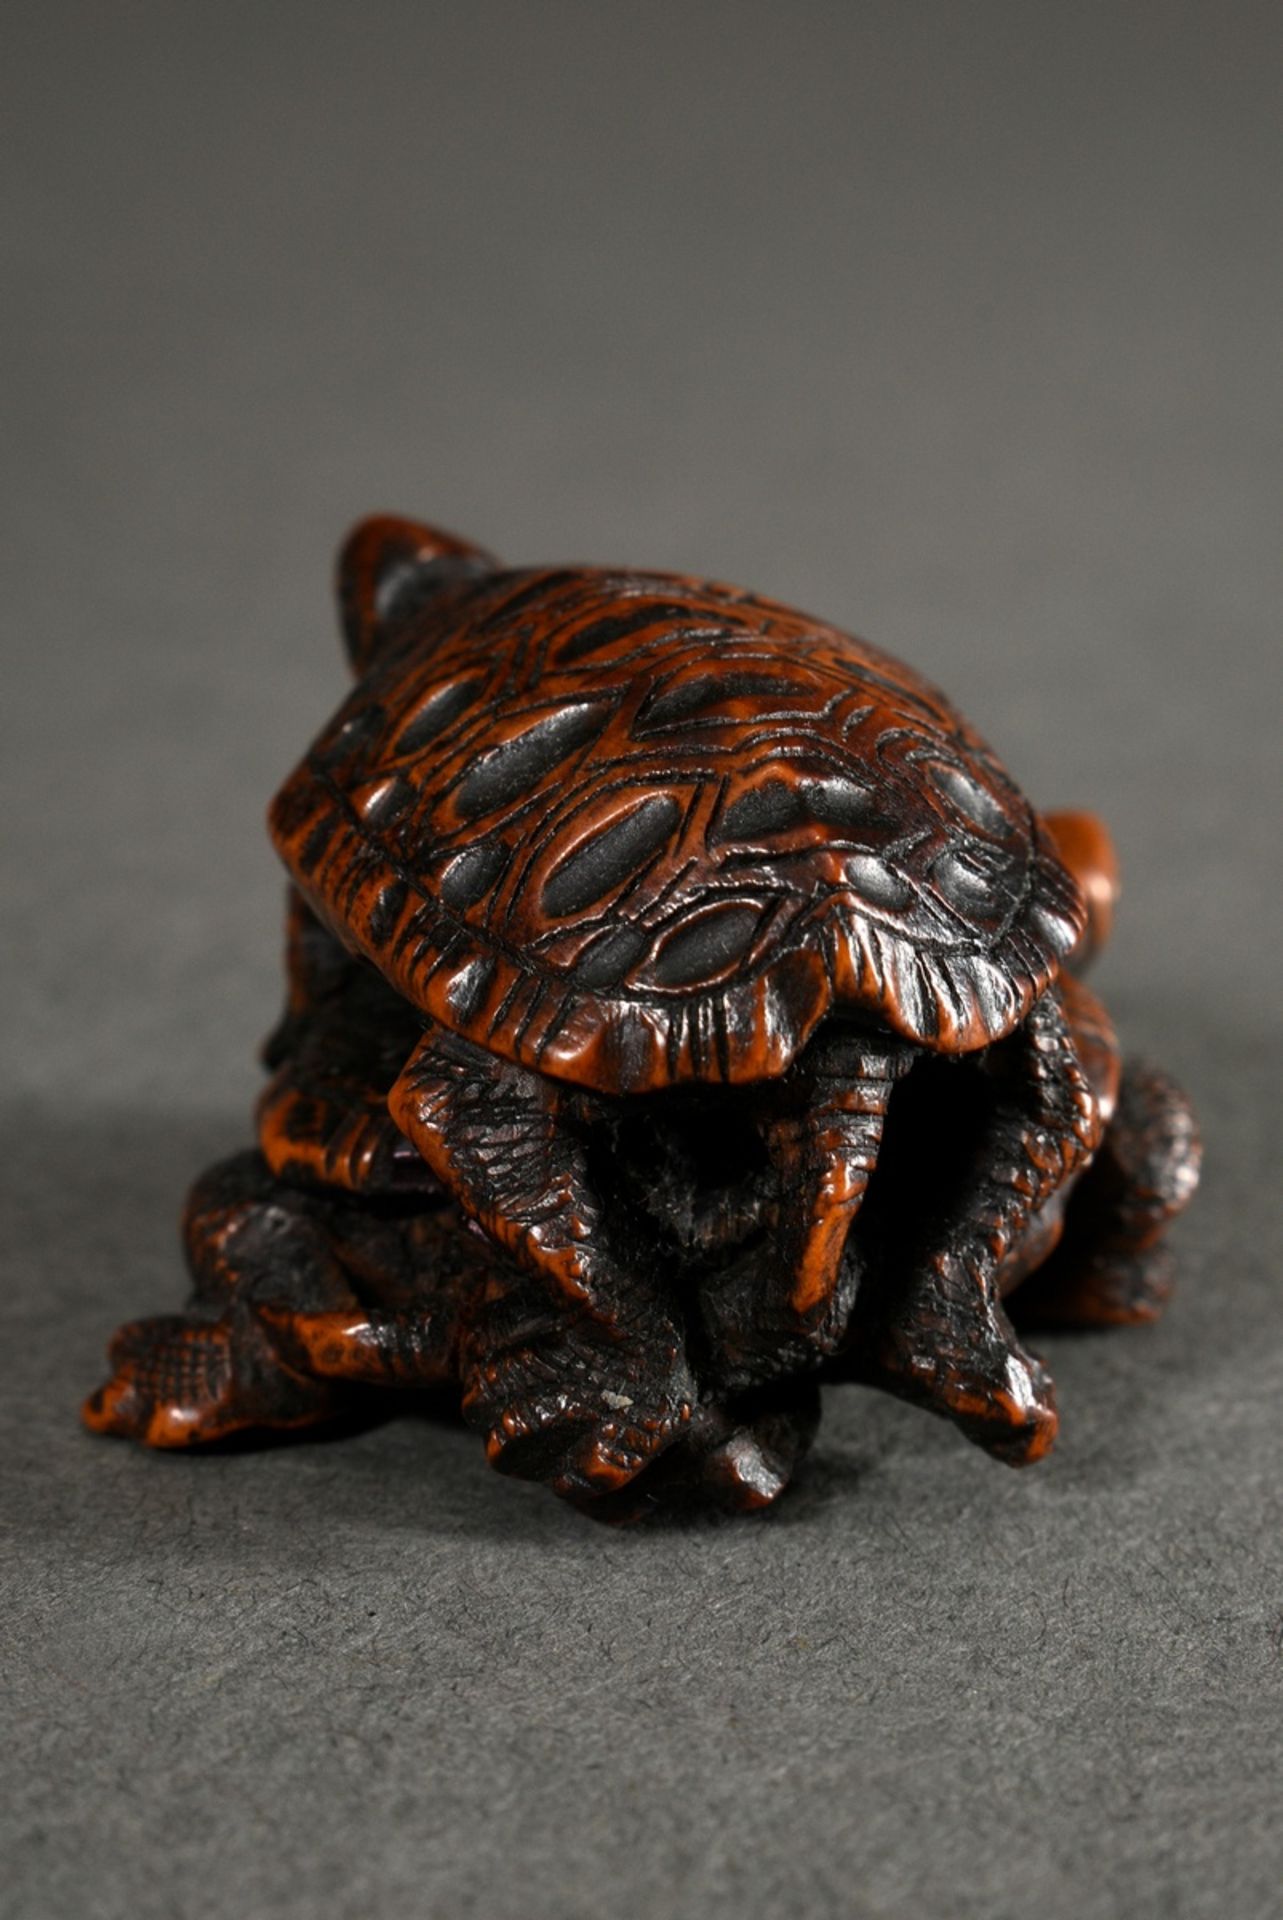 Boxwood netsuke "Two turtles standing on each other", finely carved details, strongly coloured, sig - Image 3 of 5